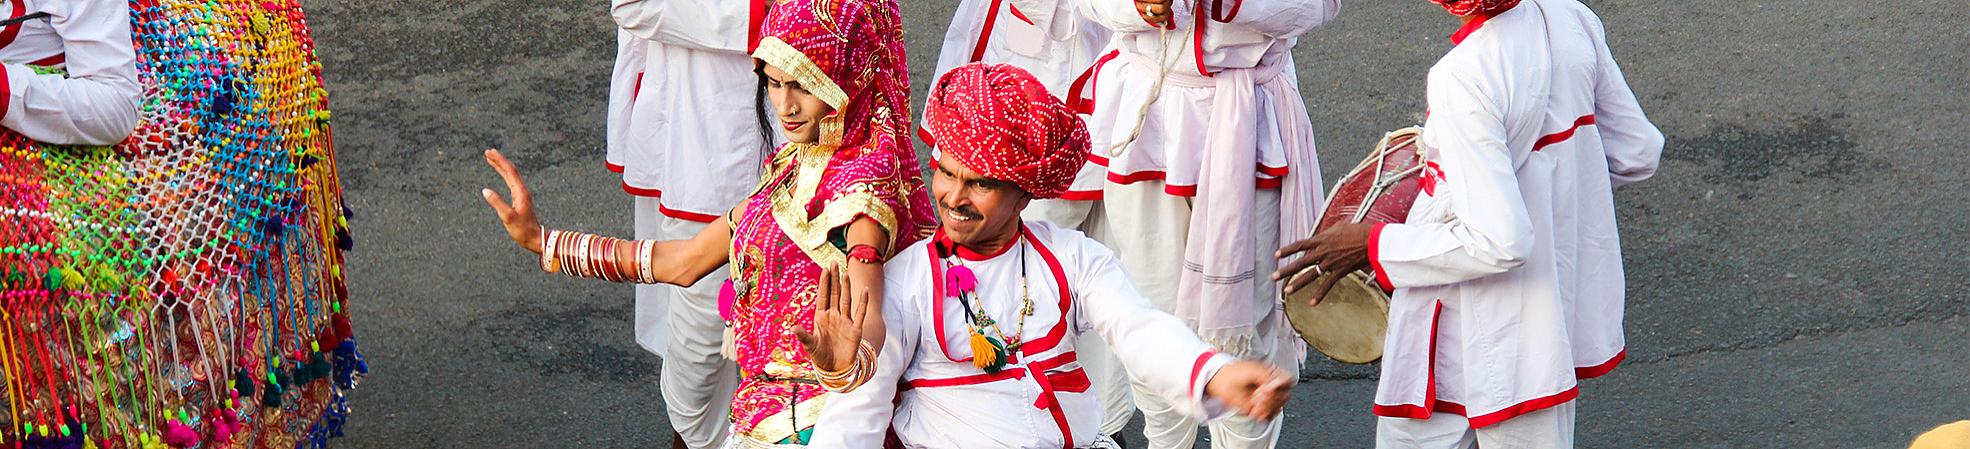 8 Most Famous Festivals Celebrated in India